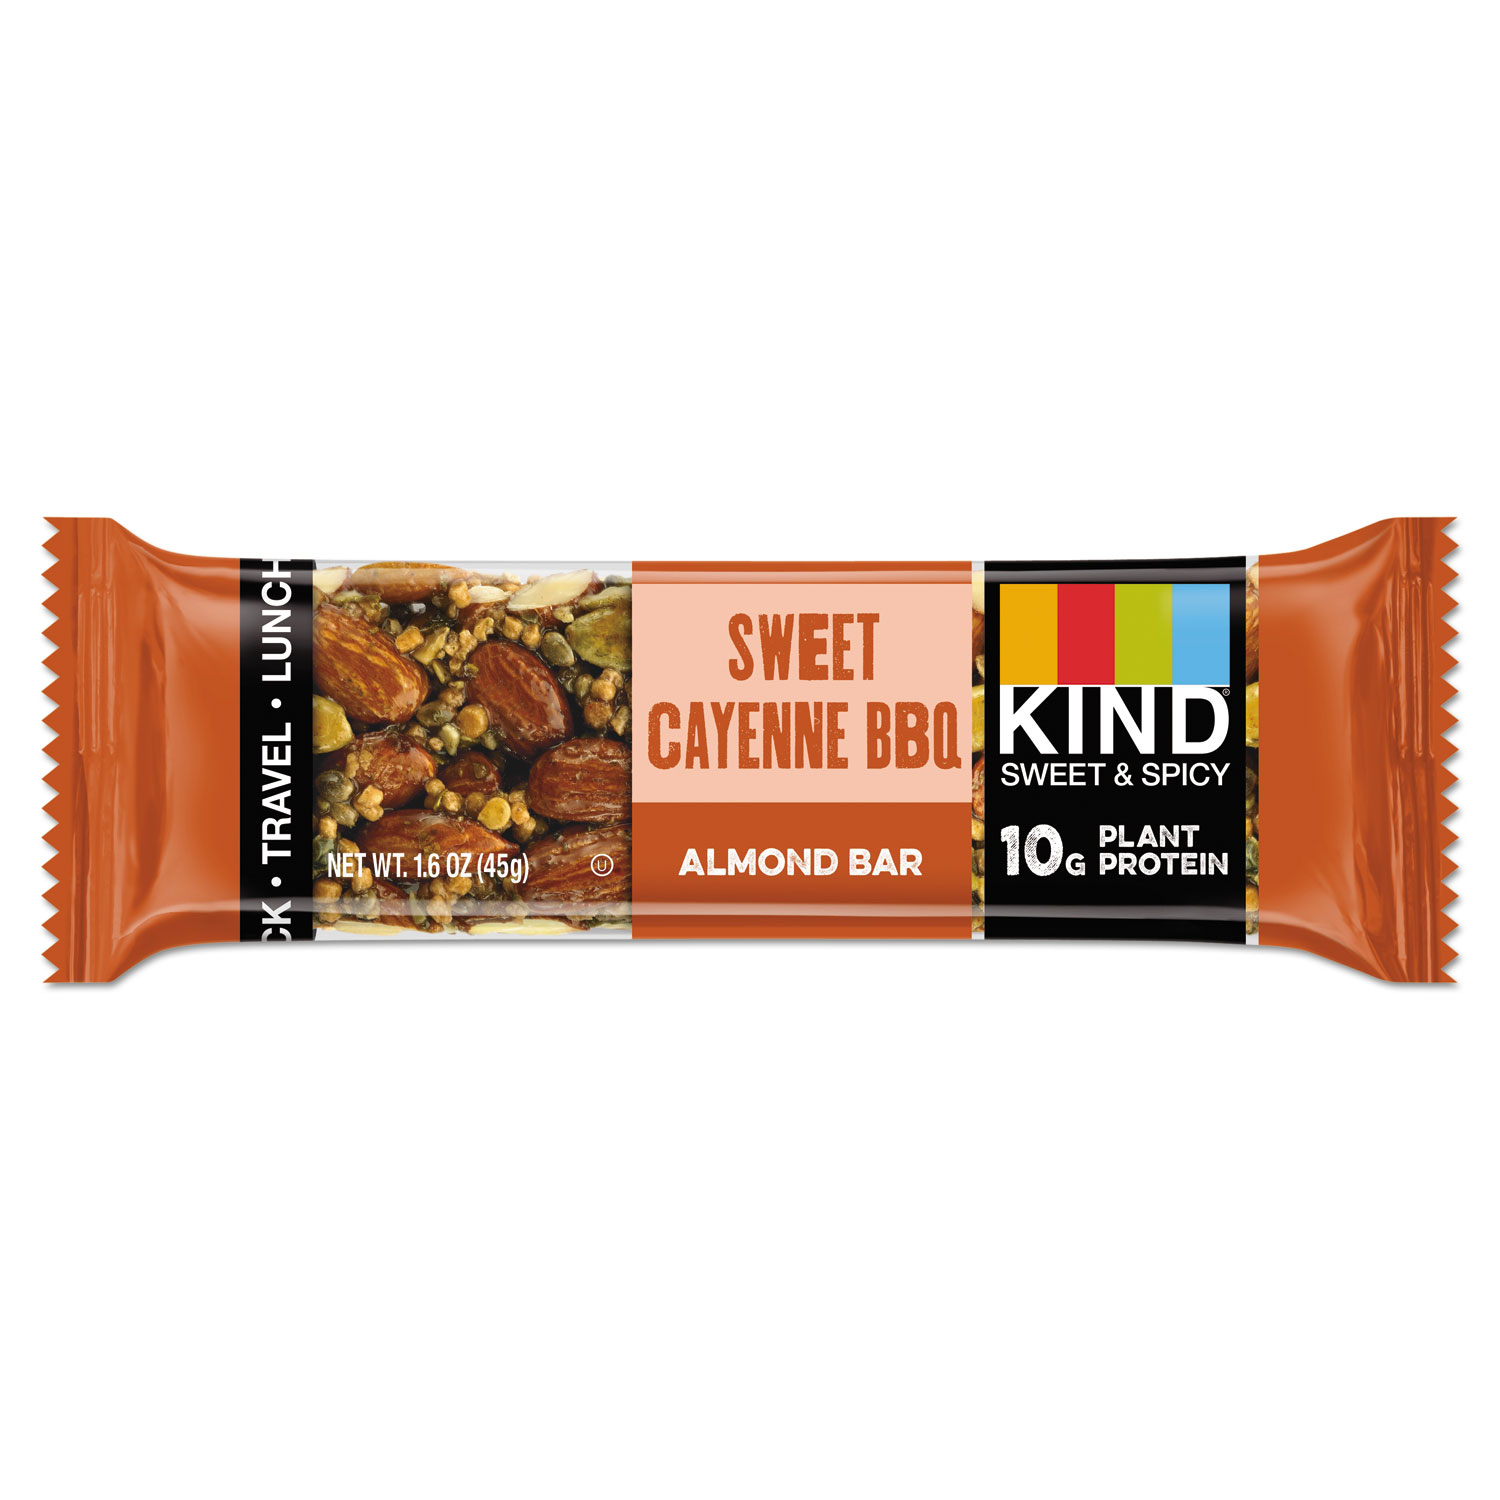 Sweet & Spicy, Sweet Cayenne Barbeque, 1.6 oz Bar, 12/Box